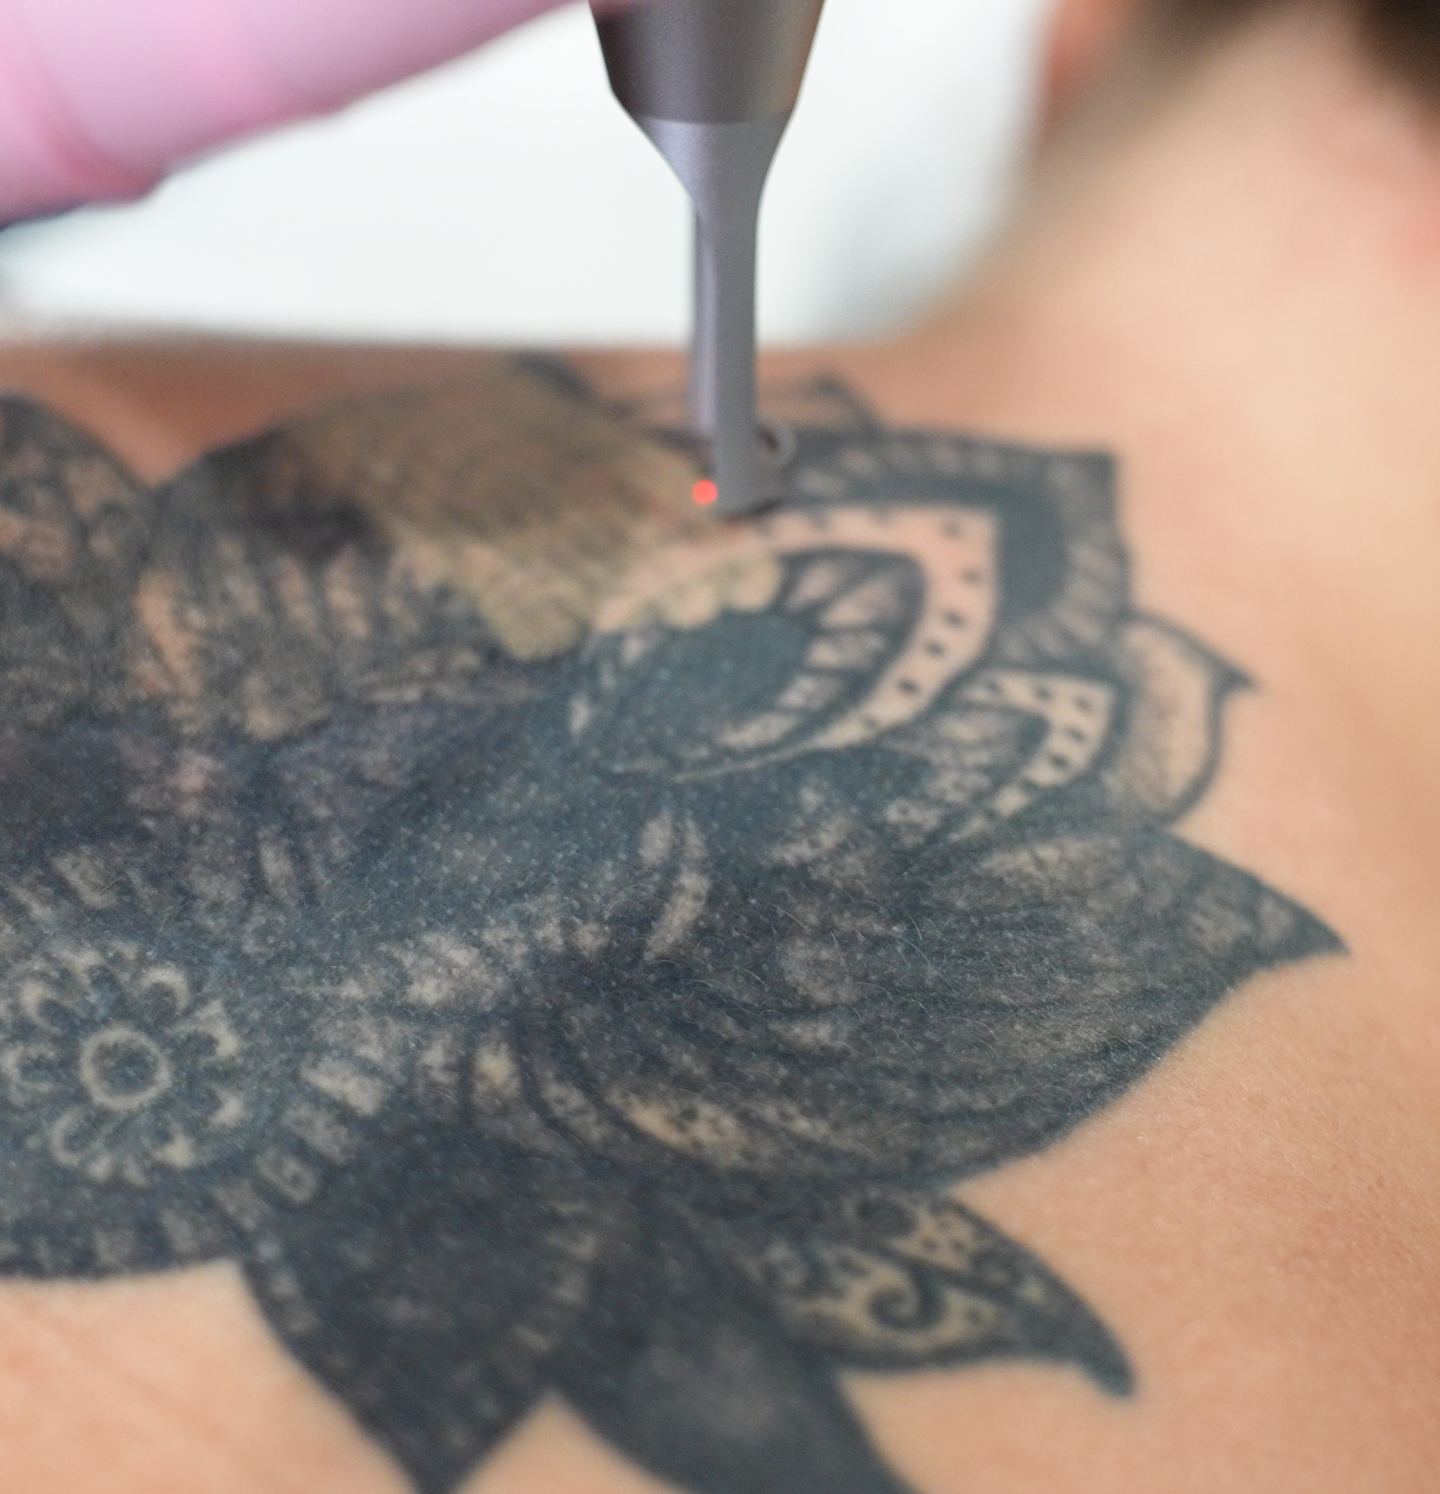 How Do Lasers Remove Tattoos?